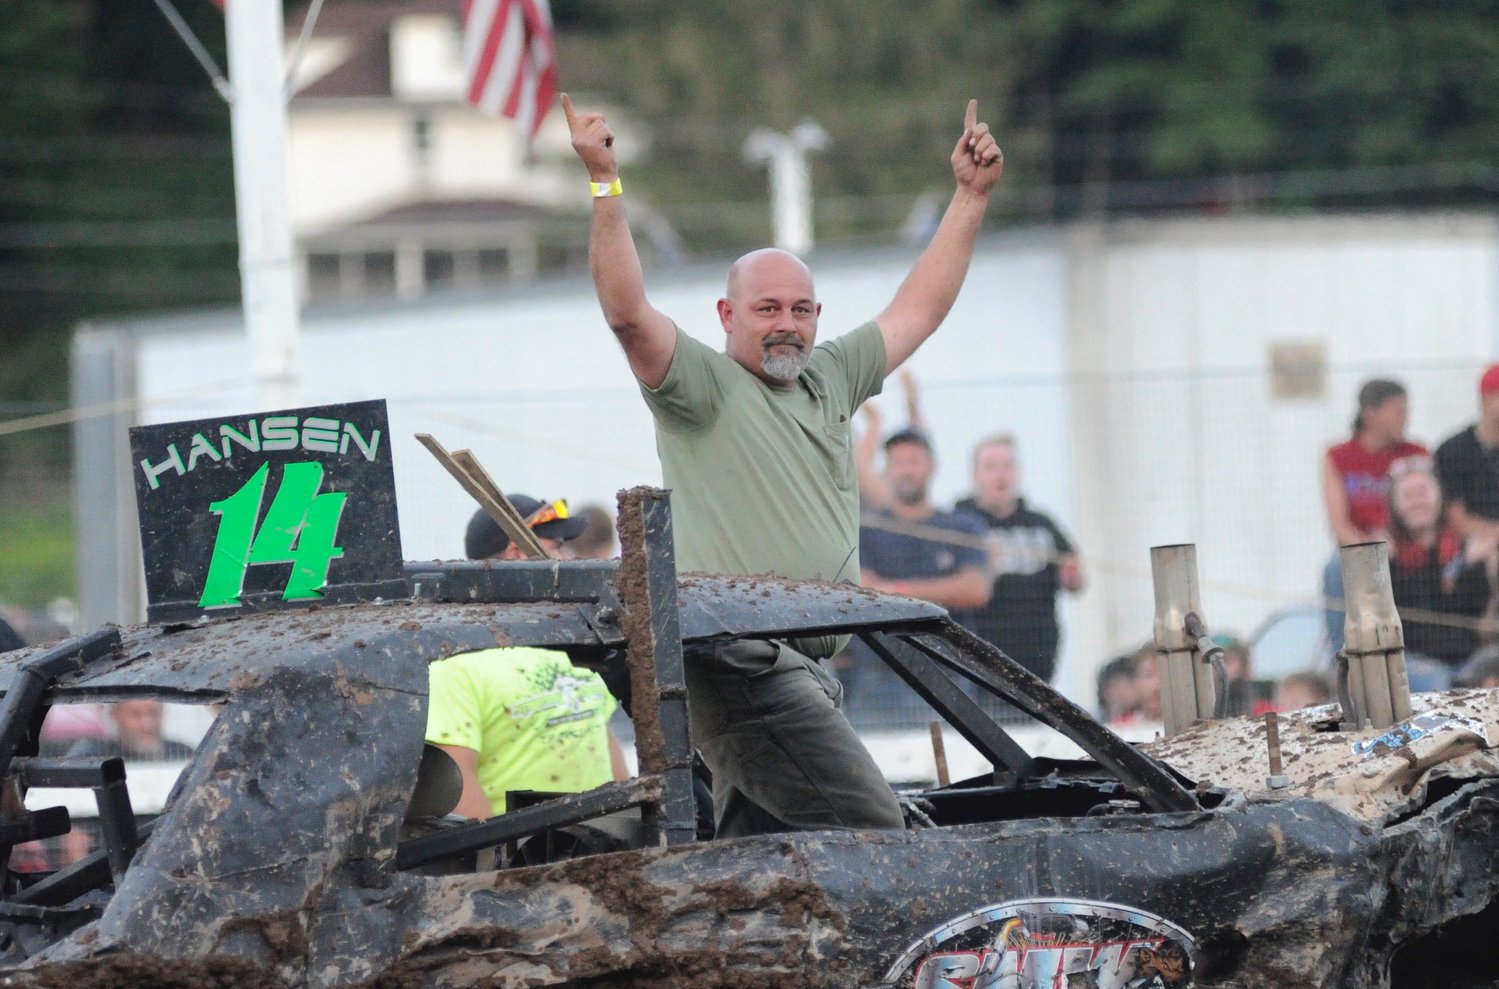 The driver of Hansen 14 won the brutally contested V-8 division, in an event that was a real crowd pleaser.